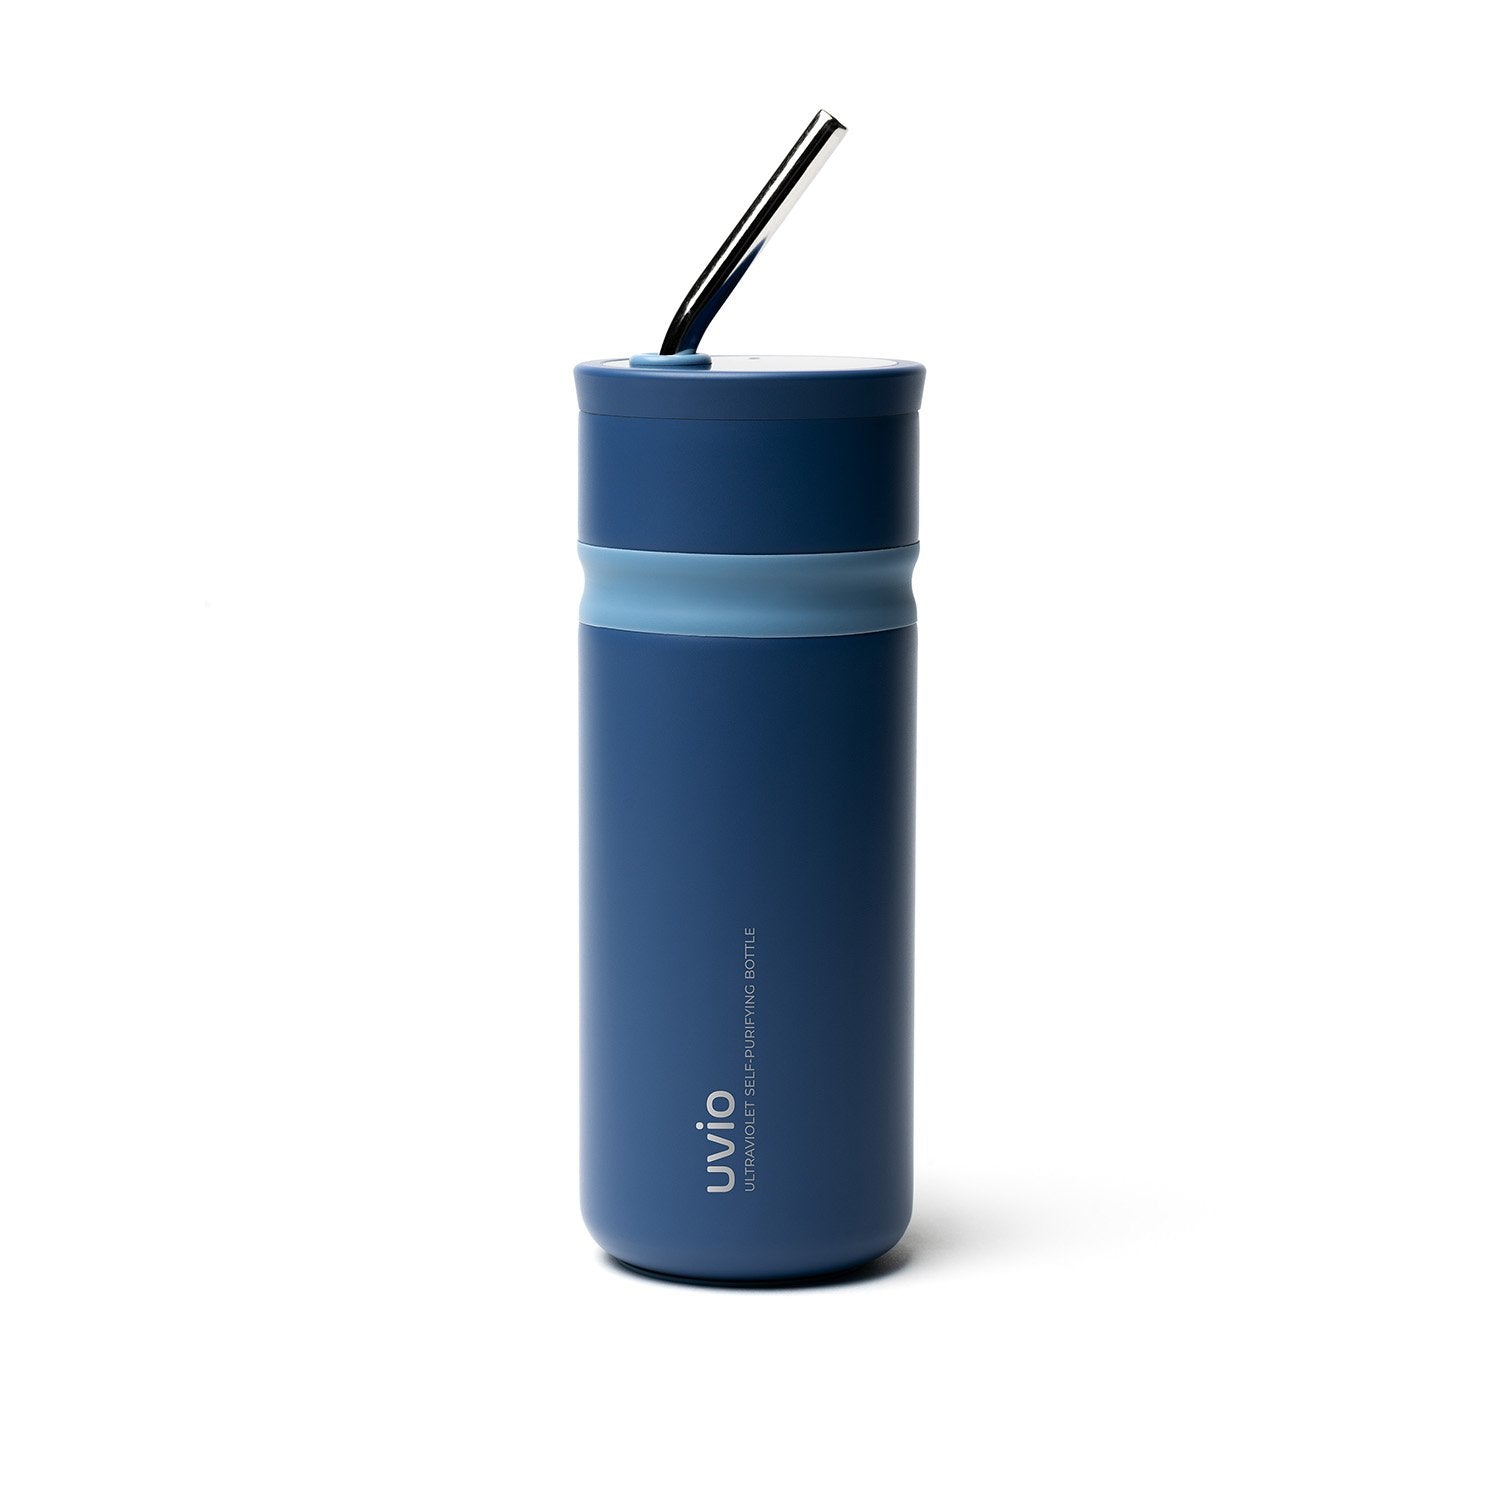 Blue metal bottle with metal straw